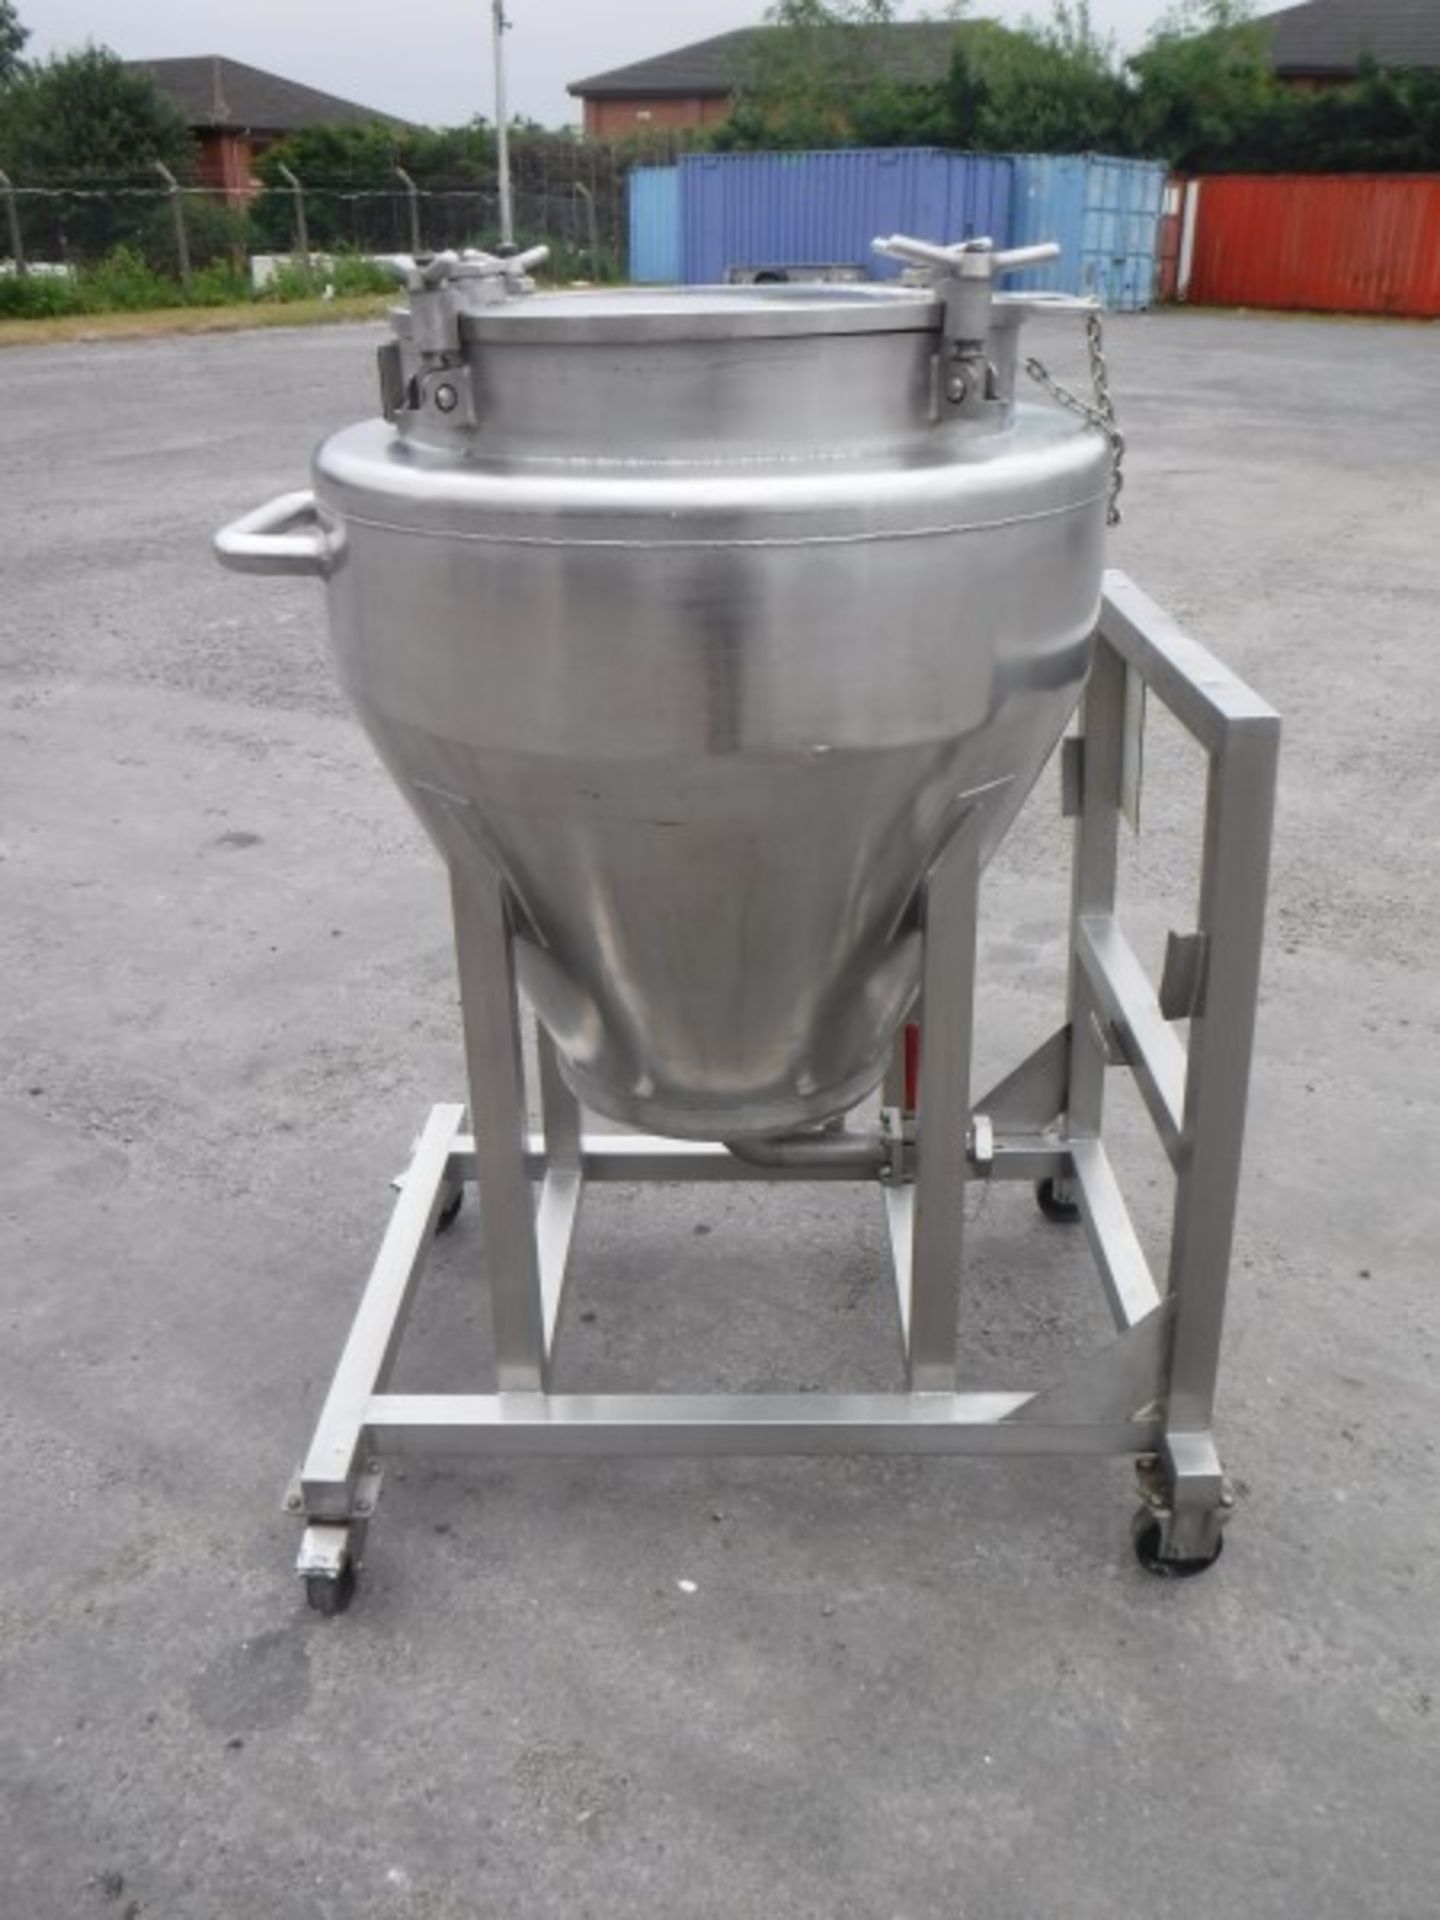 Stainless Steel 150 Litre Mobile Vessel, Outlet 1 1/2 inch RJT, Overall Height : 1400 mm, fitted - Bild 4 aus 7